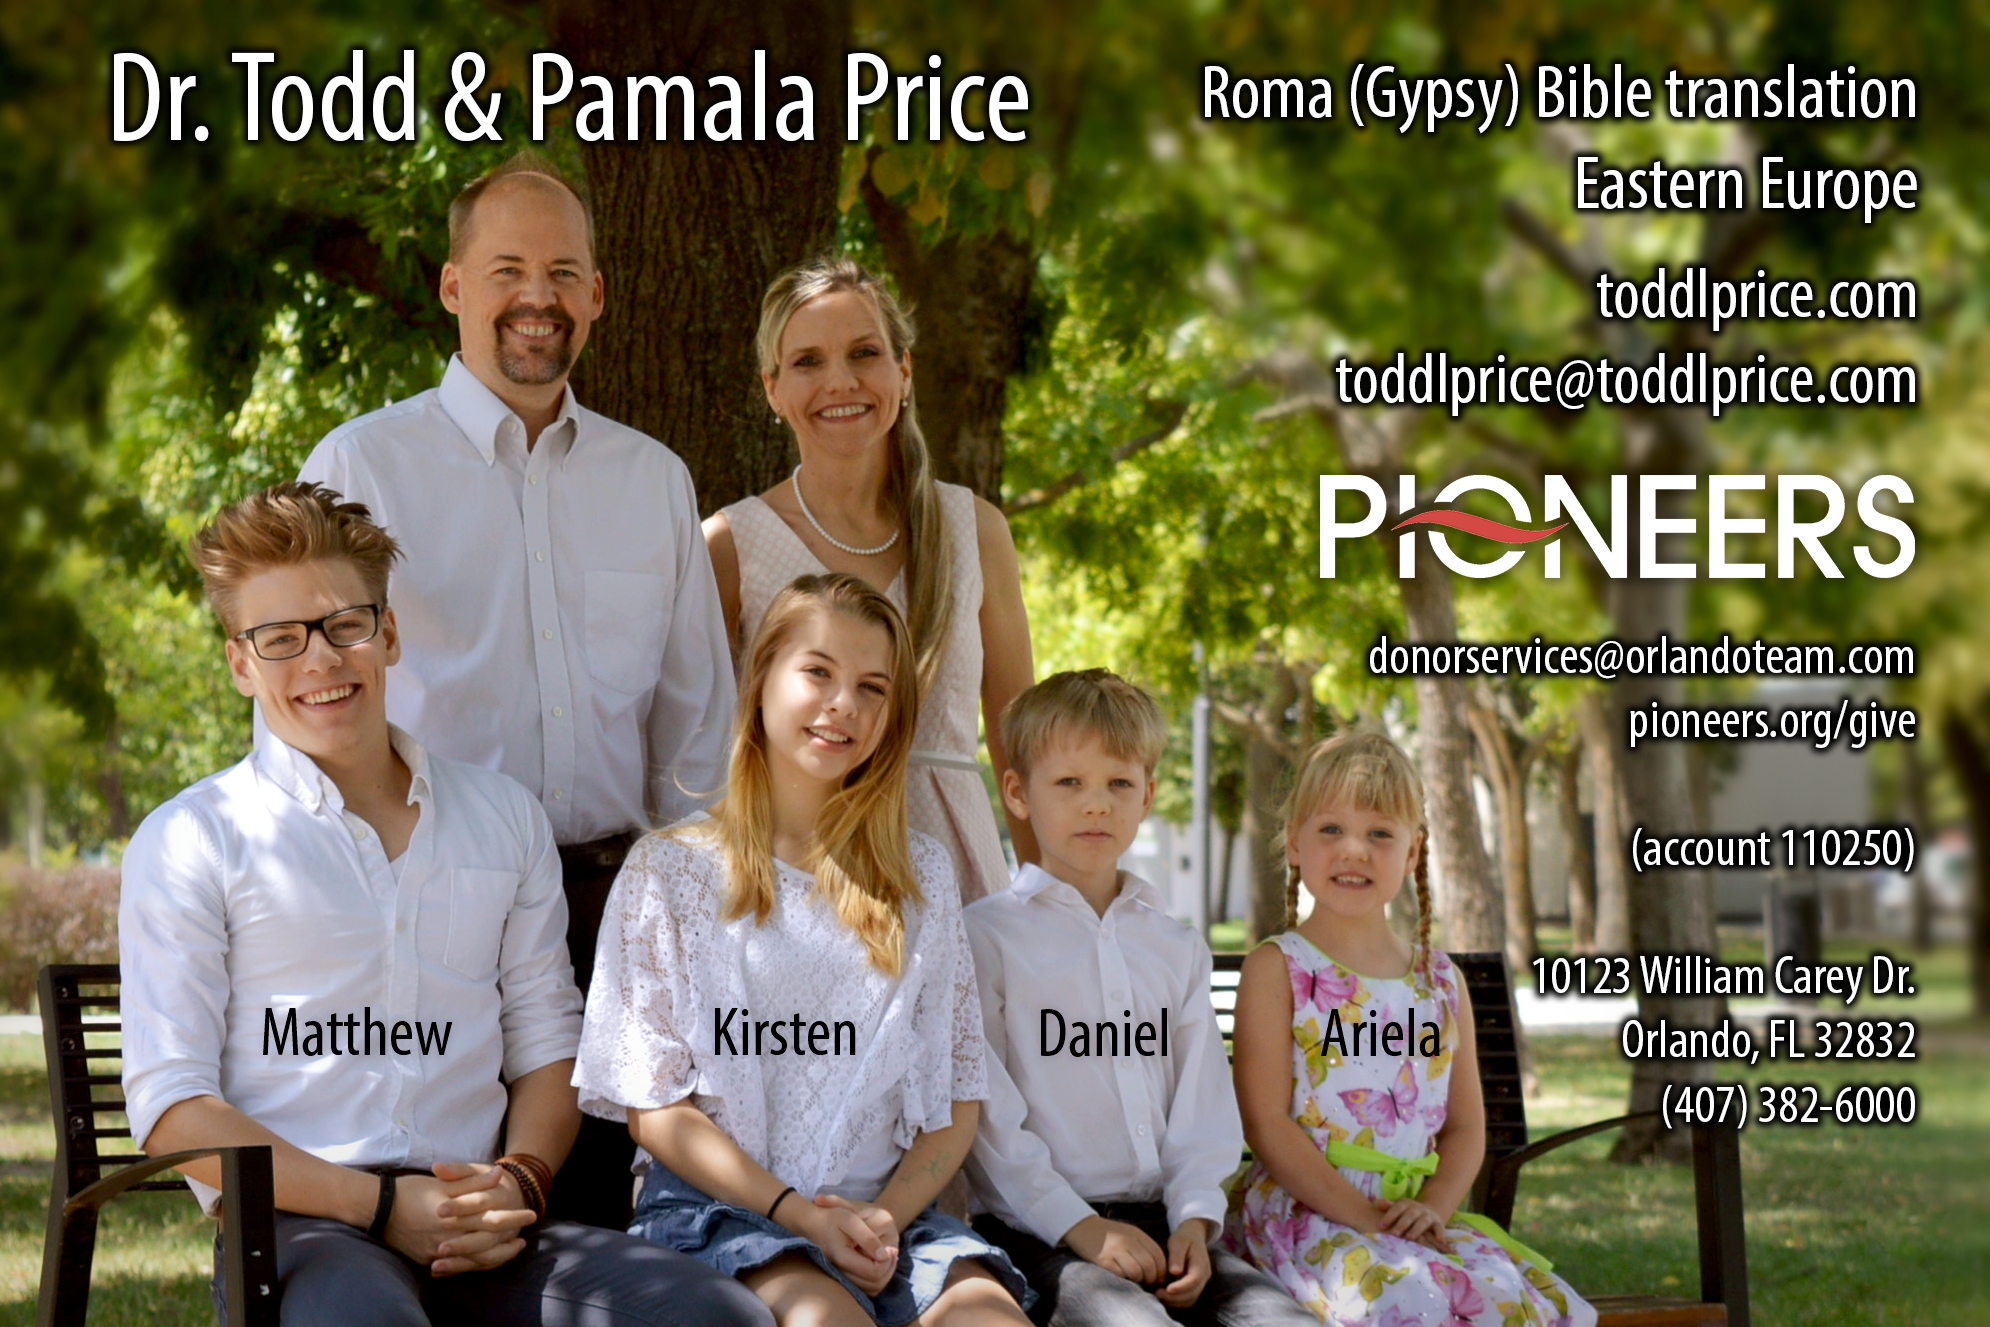 A message from one of our Global Partners—Todd and Pamala Price: